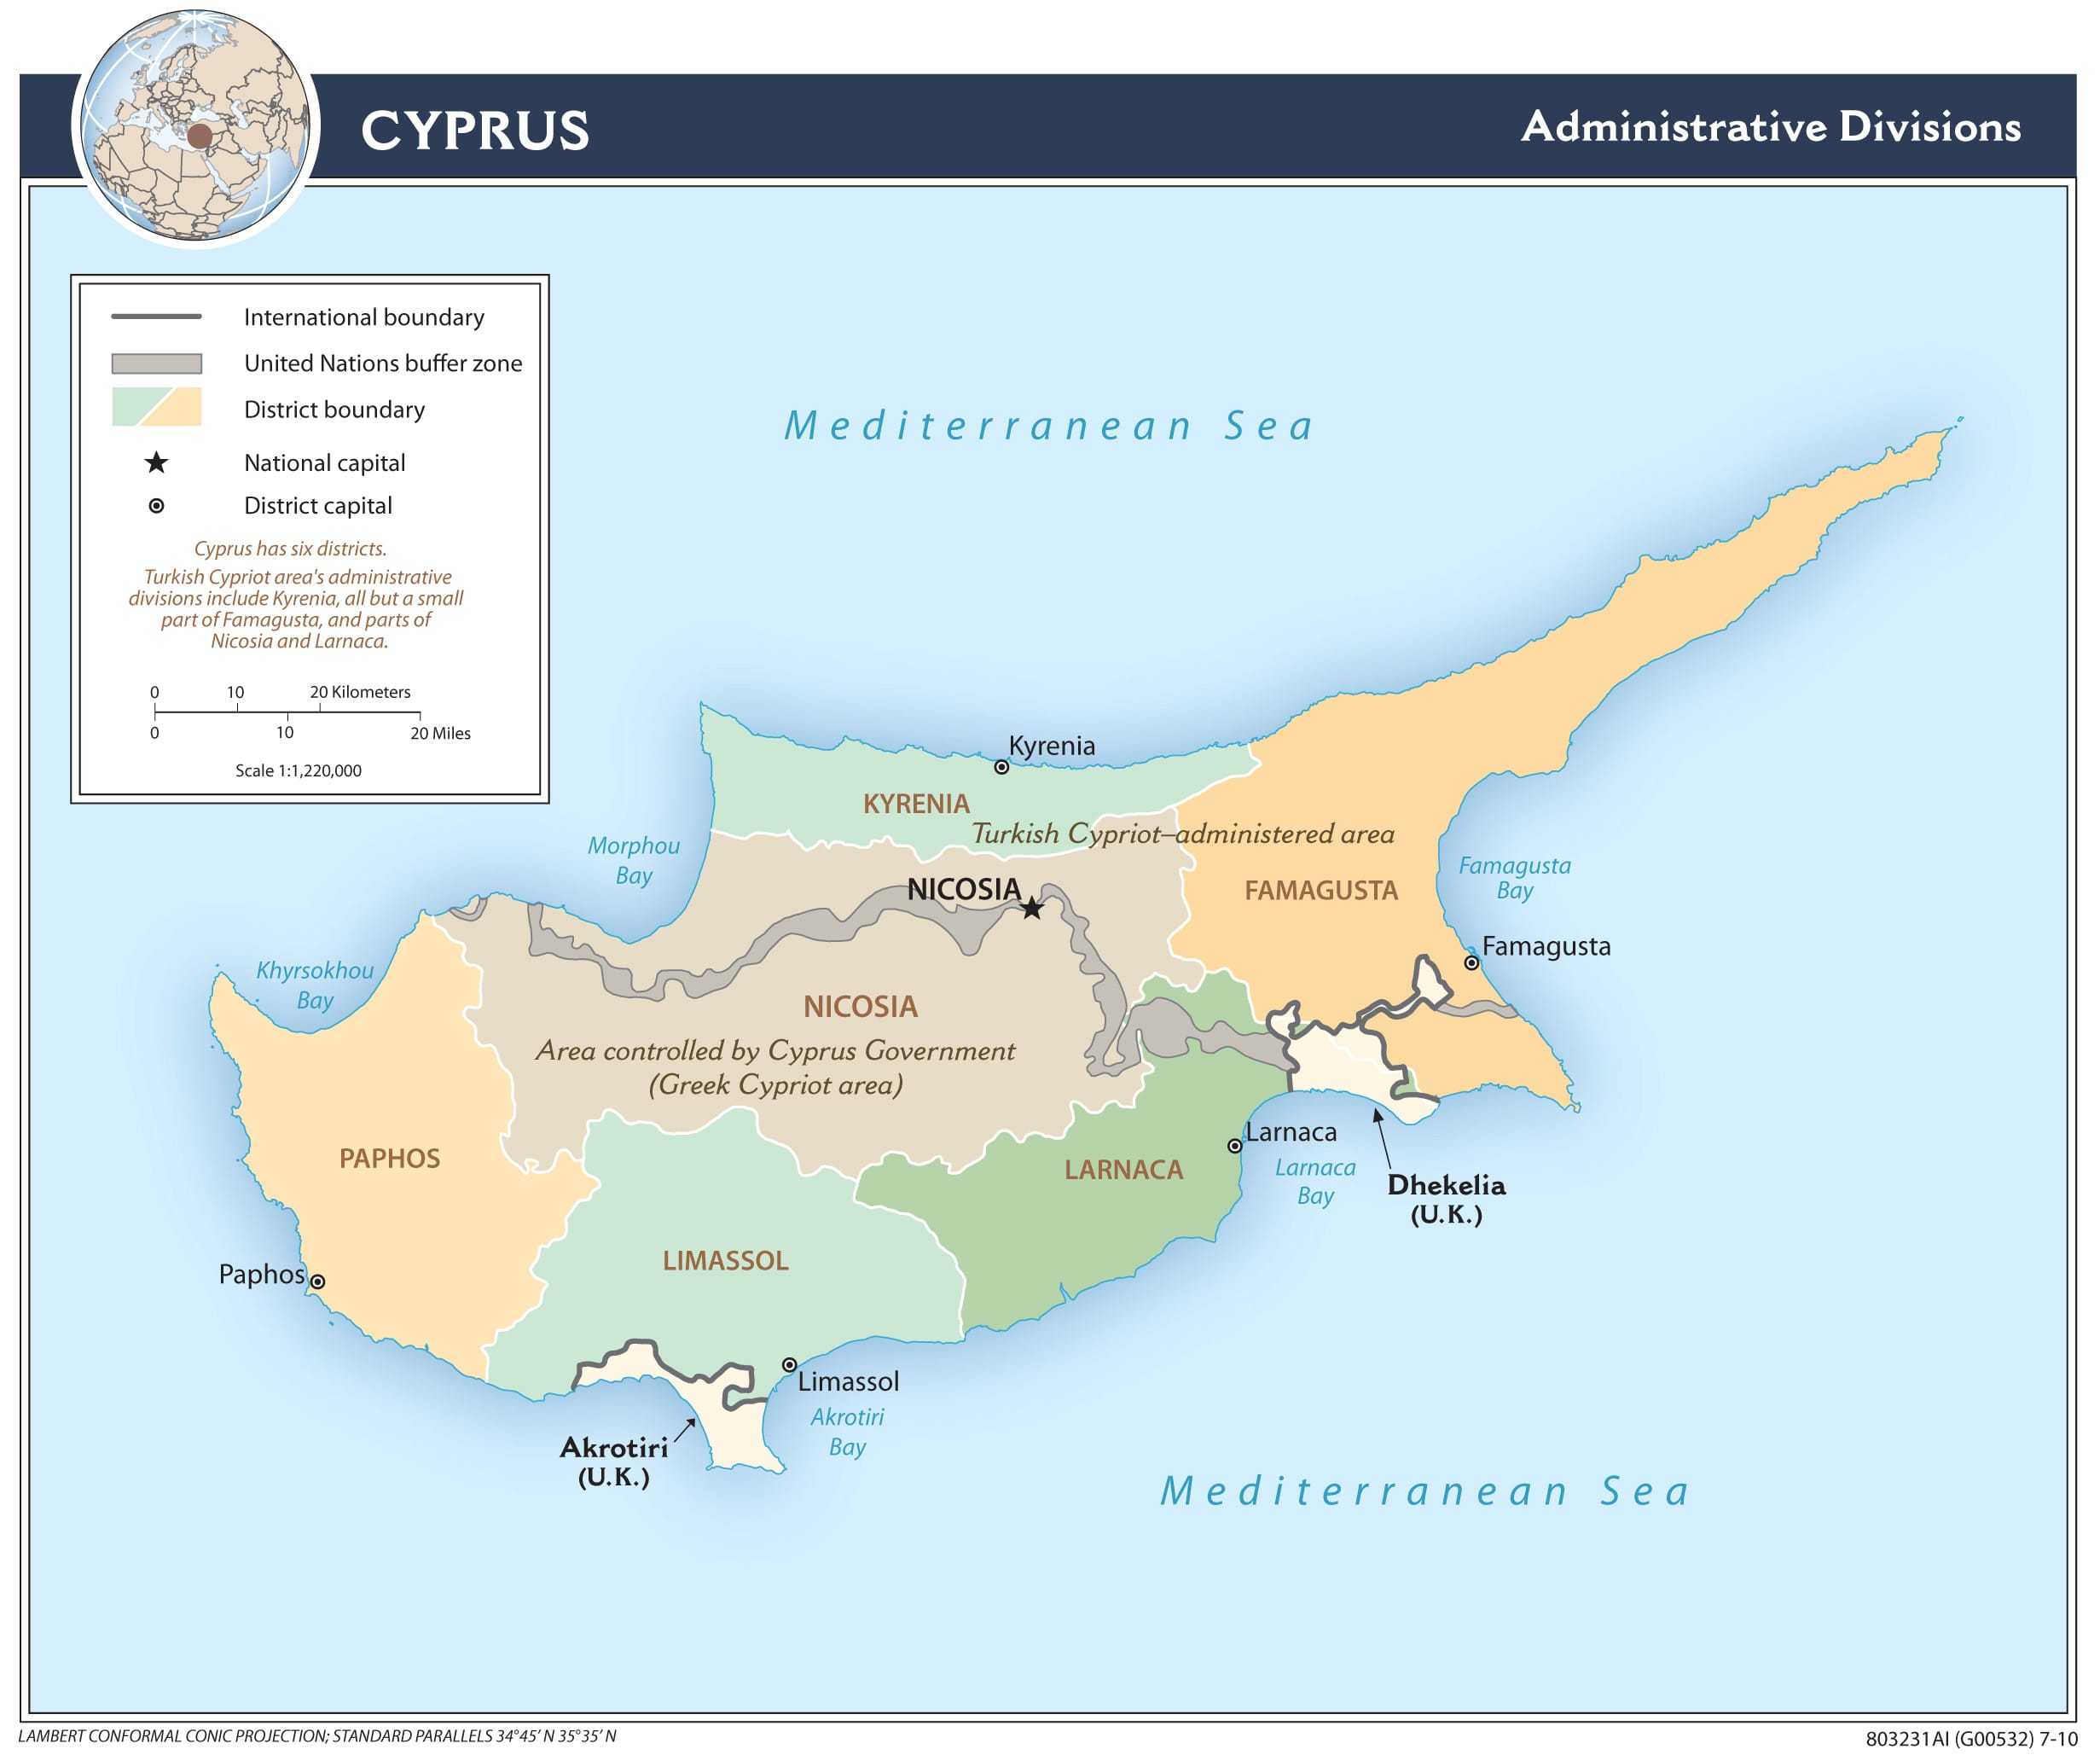 Administrative map of Cyprus.